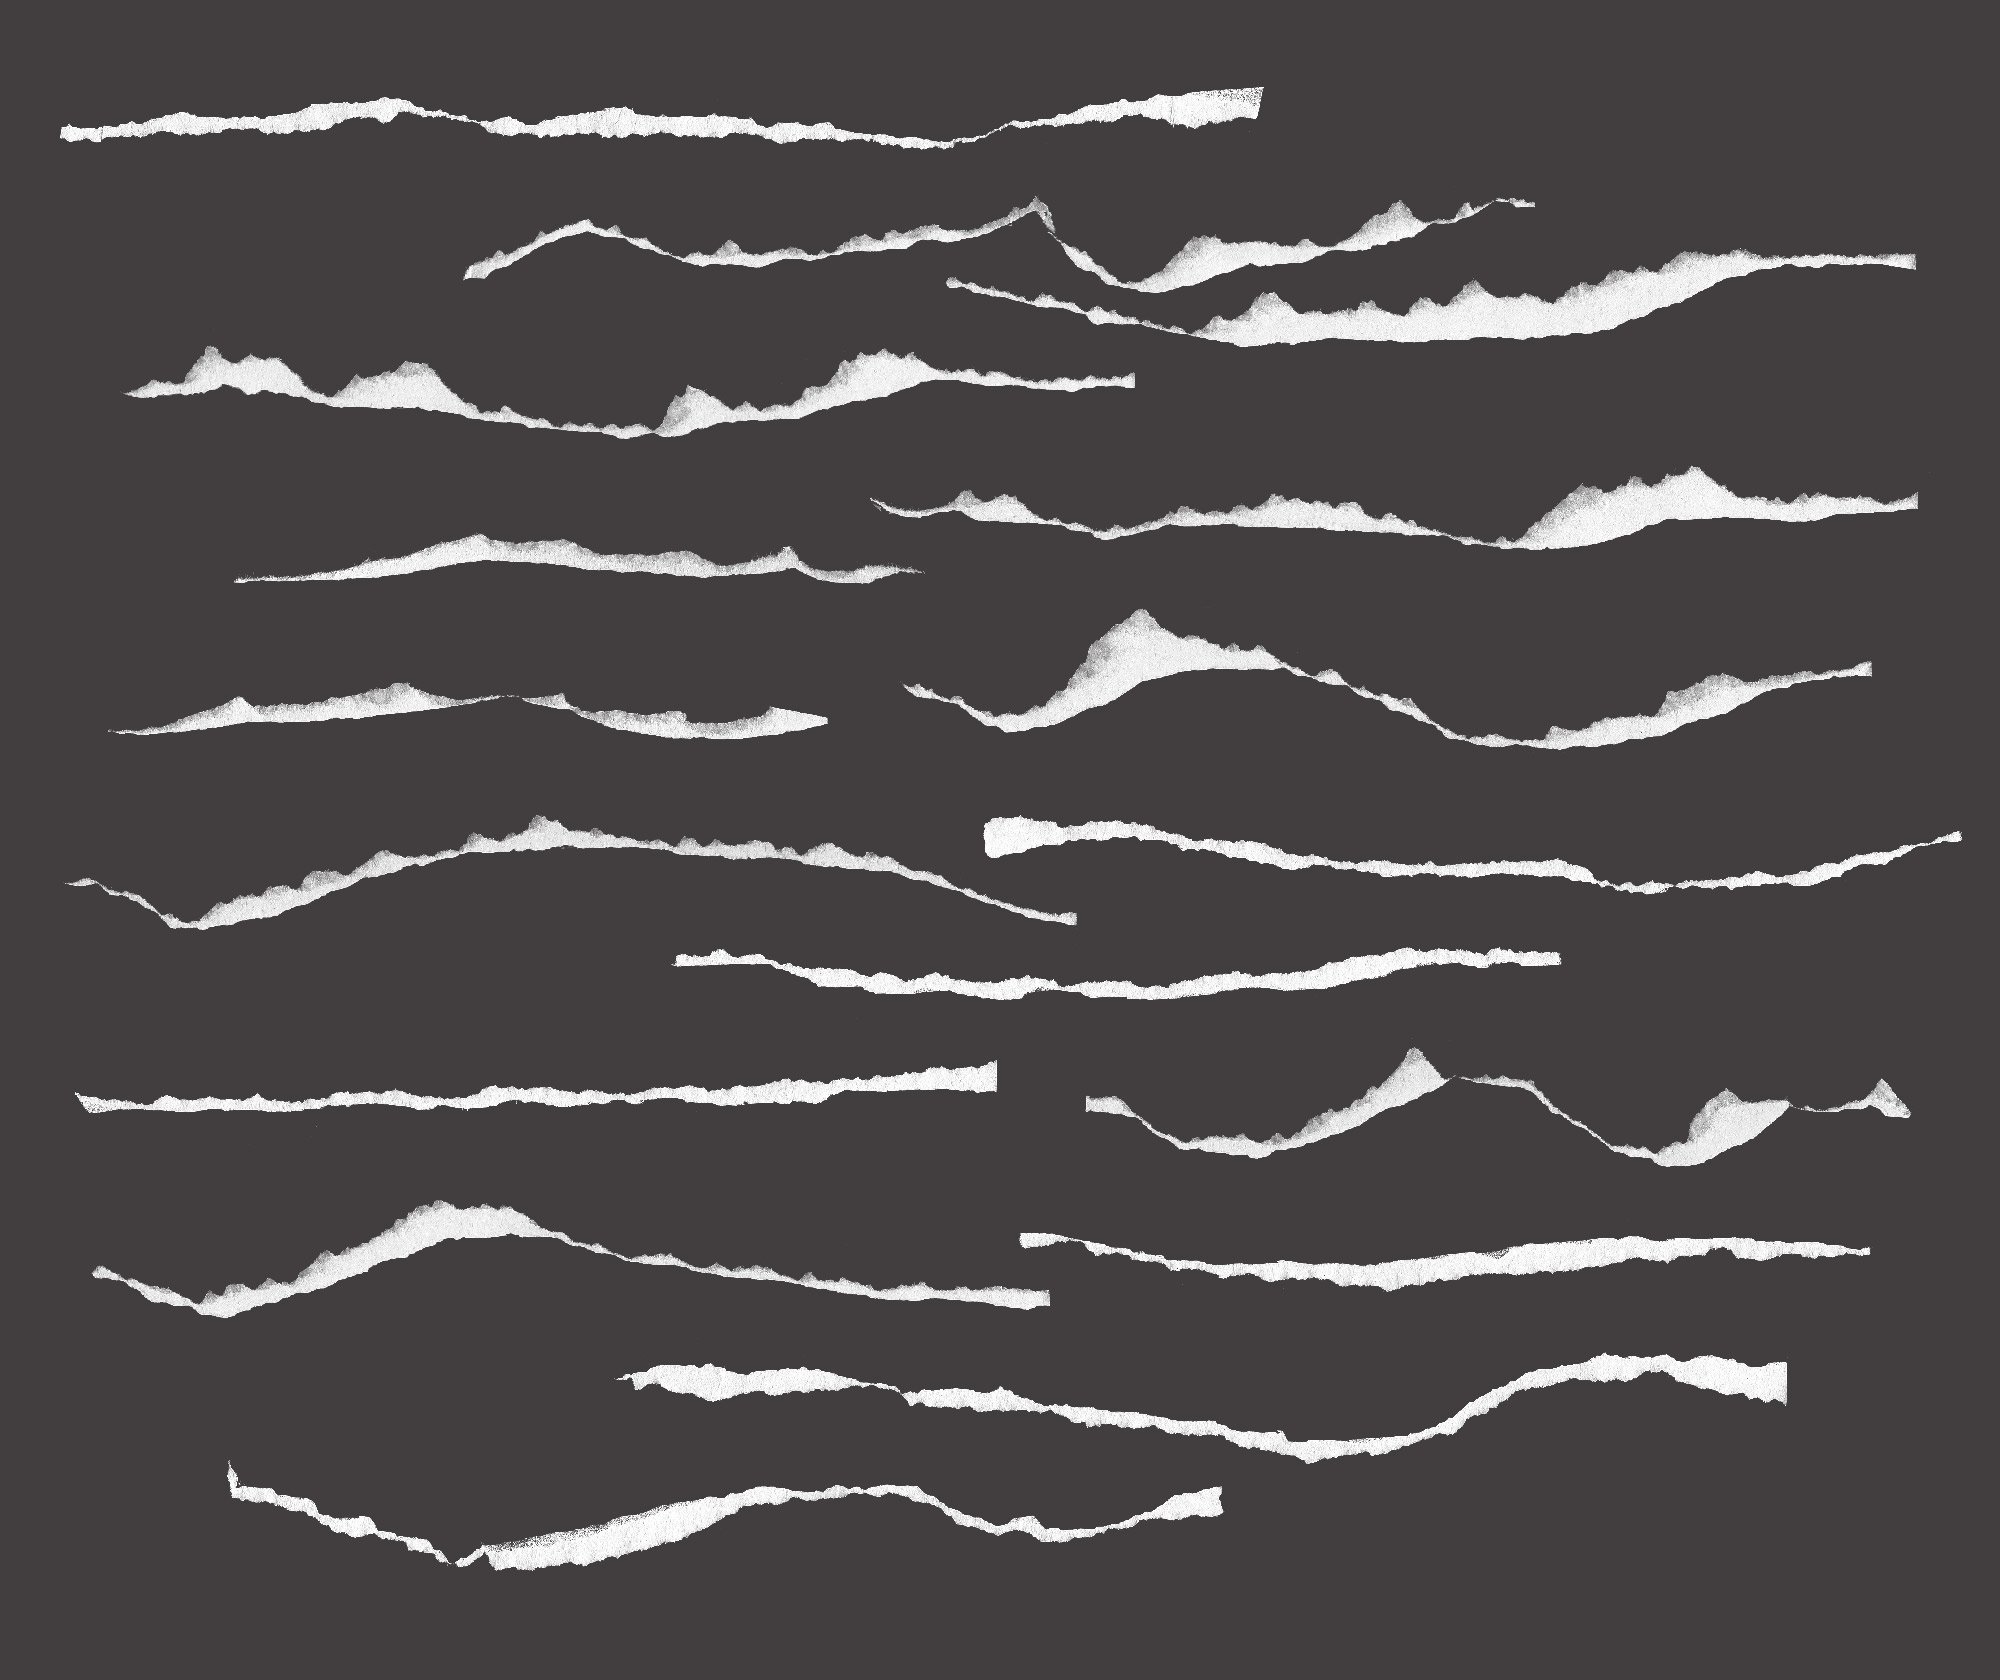 Ripped Paper PNG - PNG All